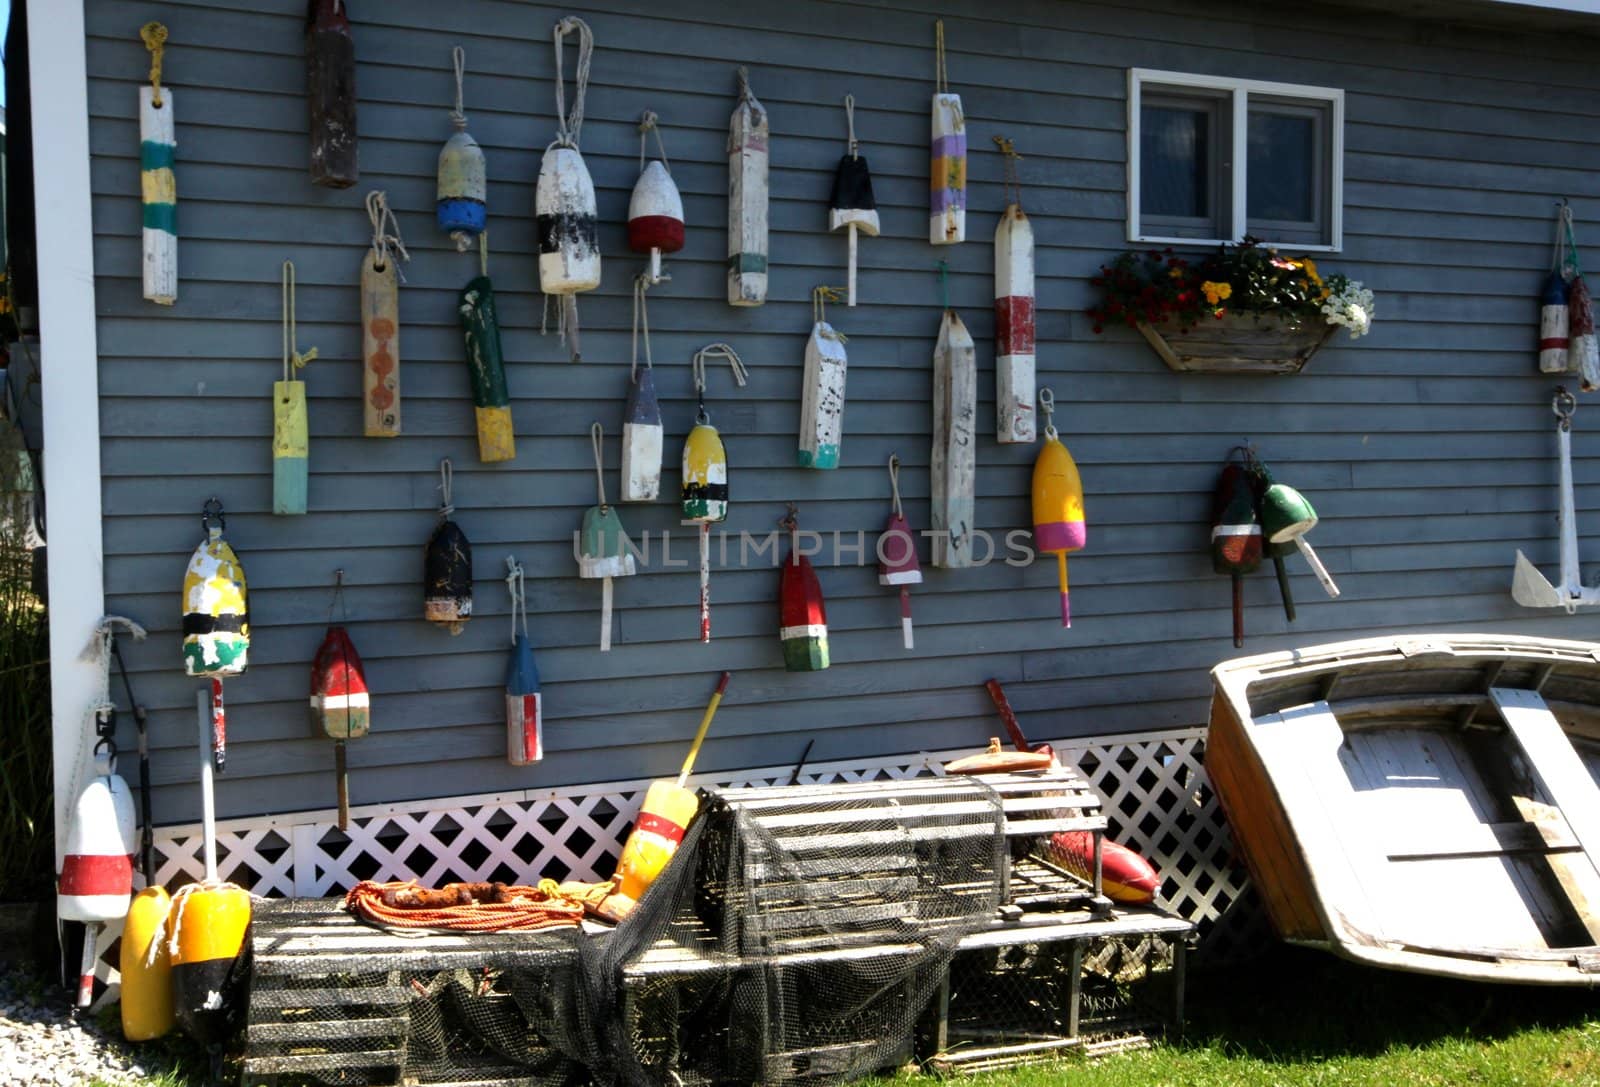 Series of lobster buoys hanging on the side of a boathouse